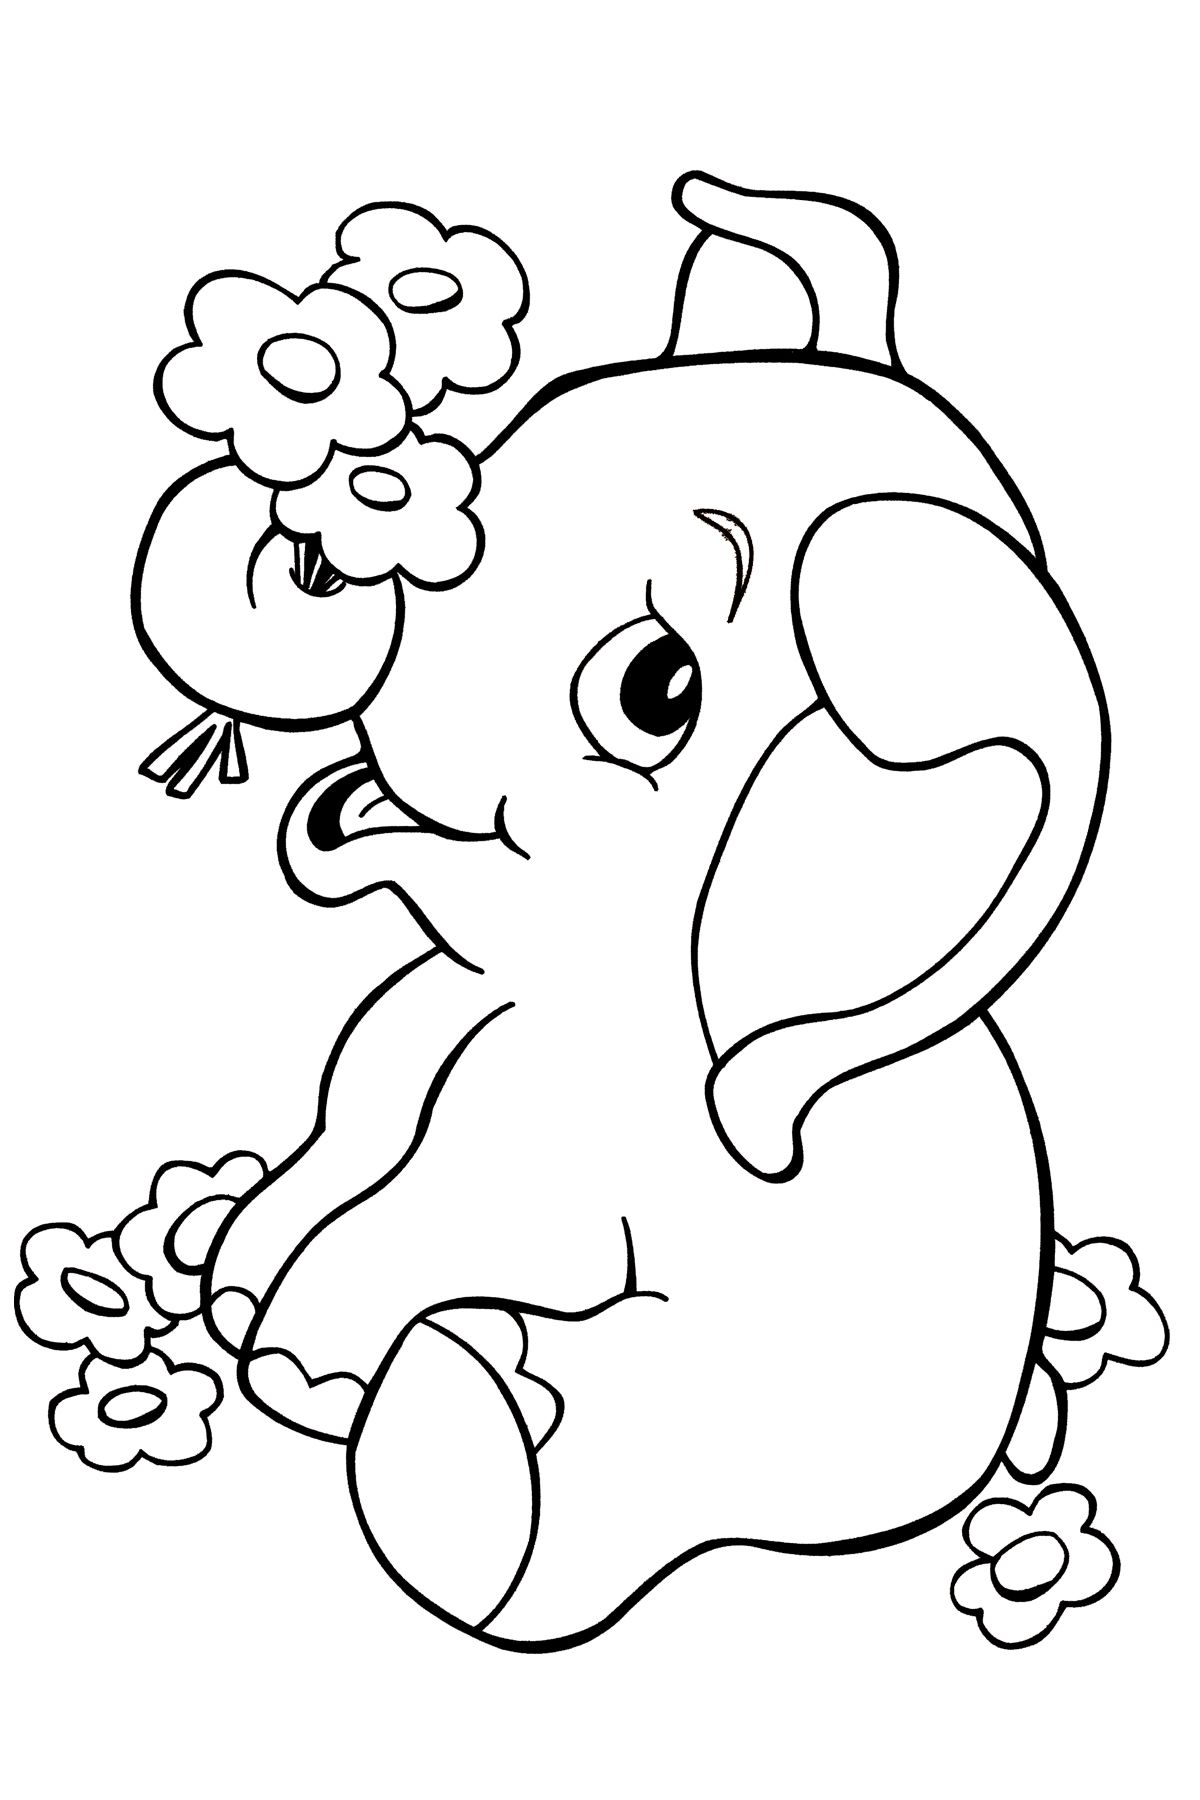 animal coloring pages elephant free elephant coloring pages elephant coloring animal pages 